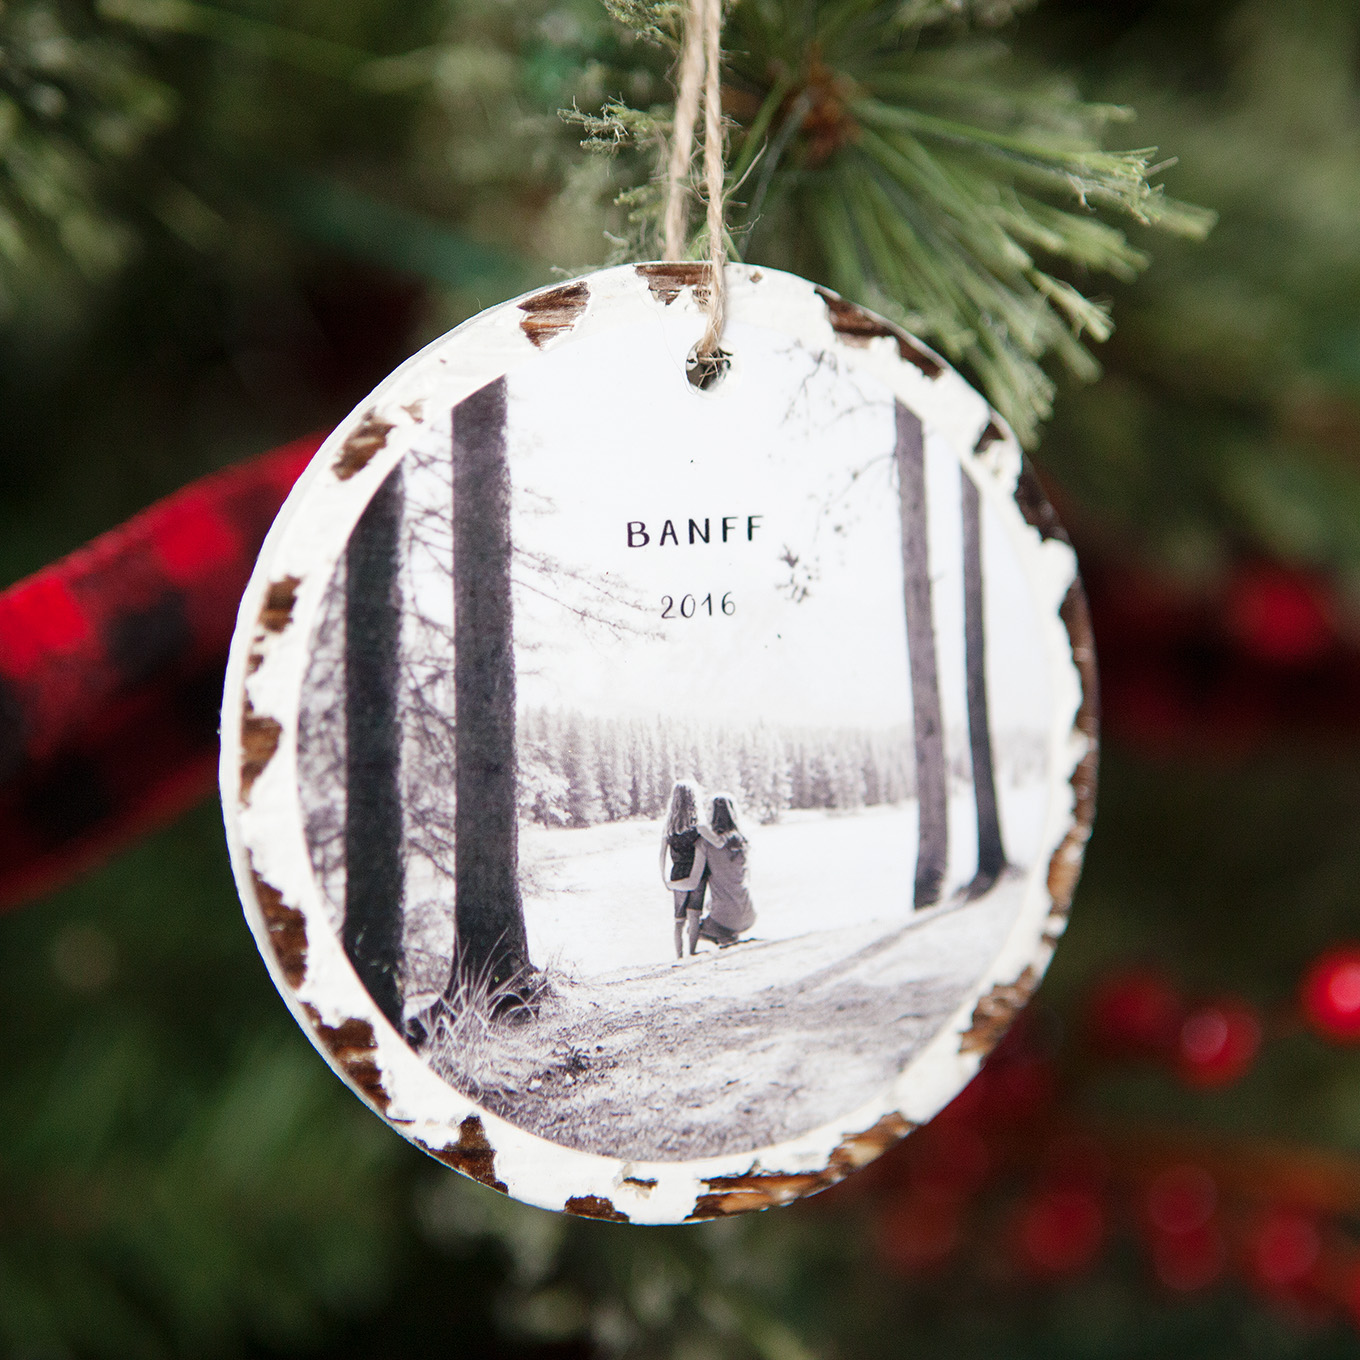 Trim the tree with these 10 minute photo keepsake ornaments. They take no time at all to make and it will mean so much to fill the tree with family memories.